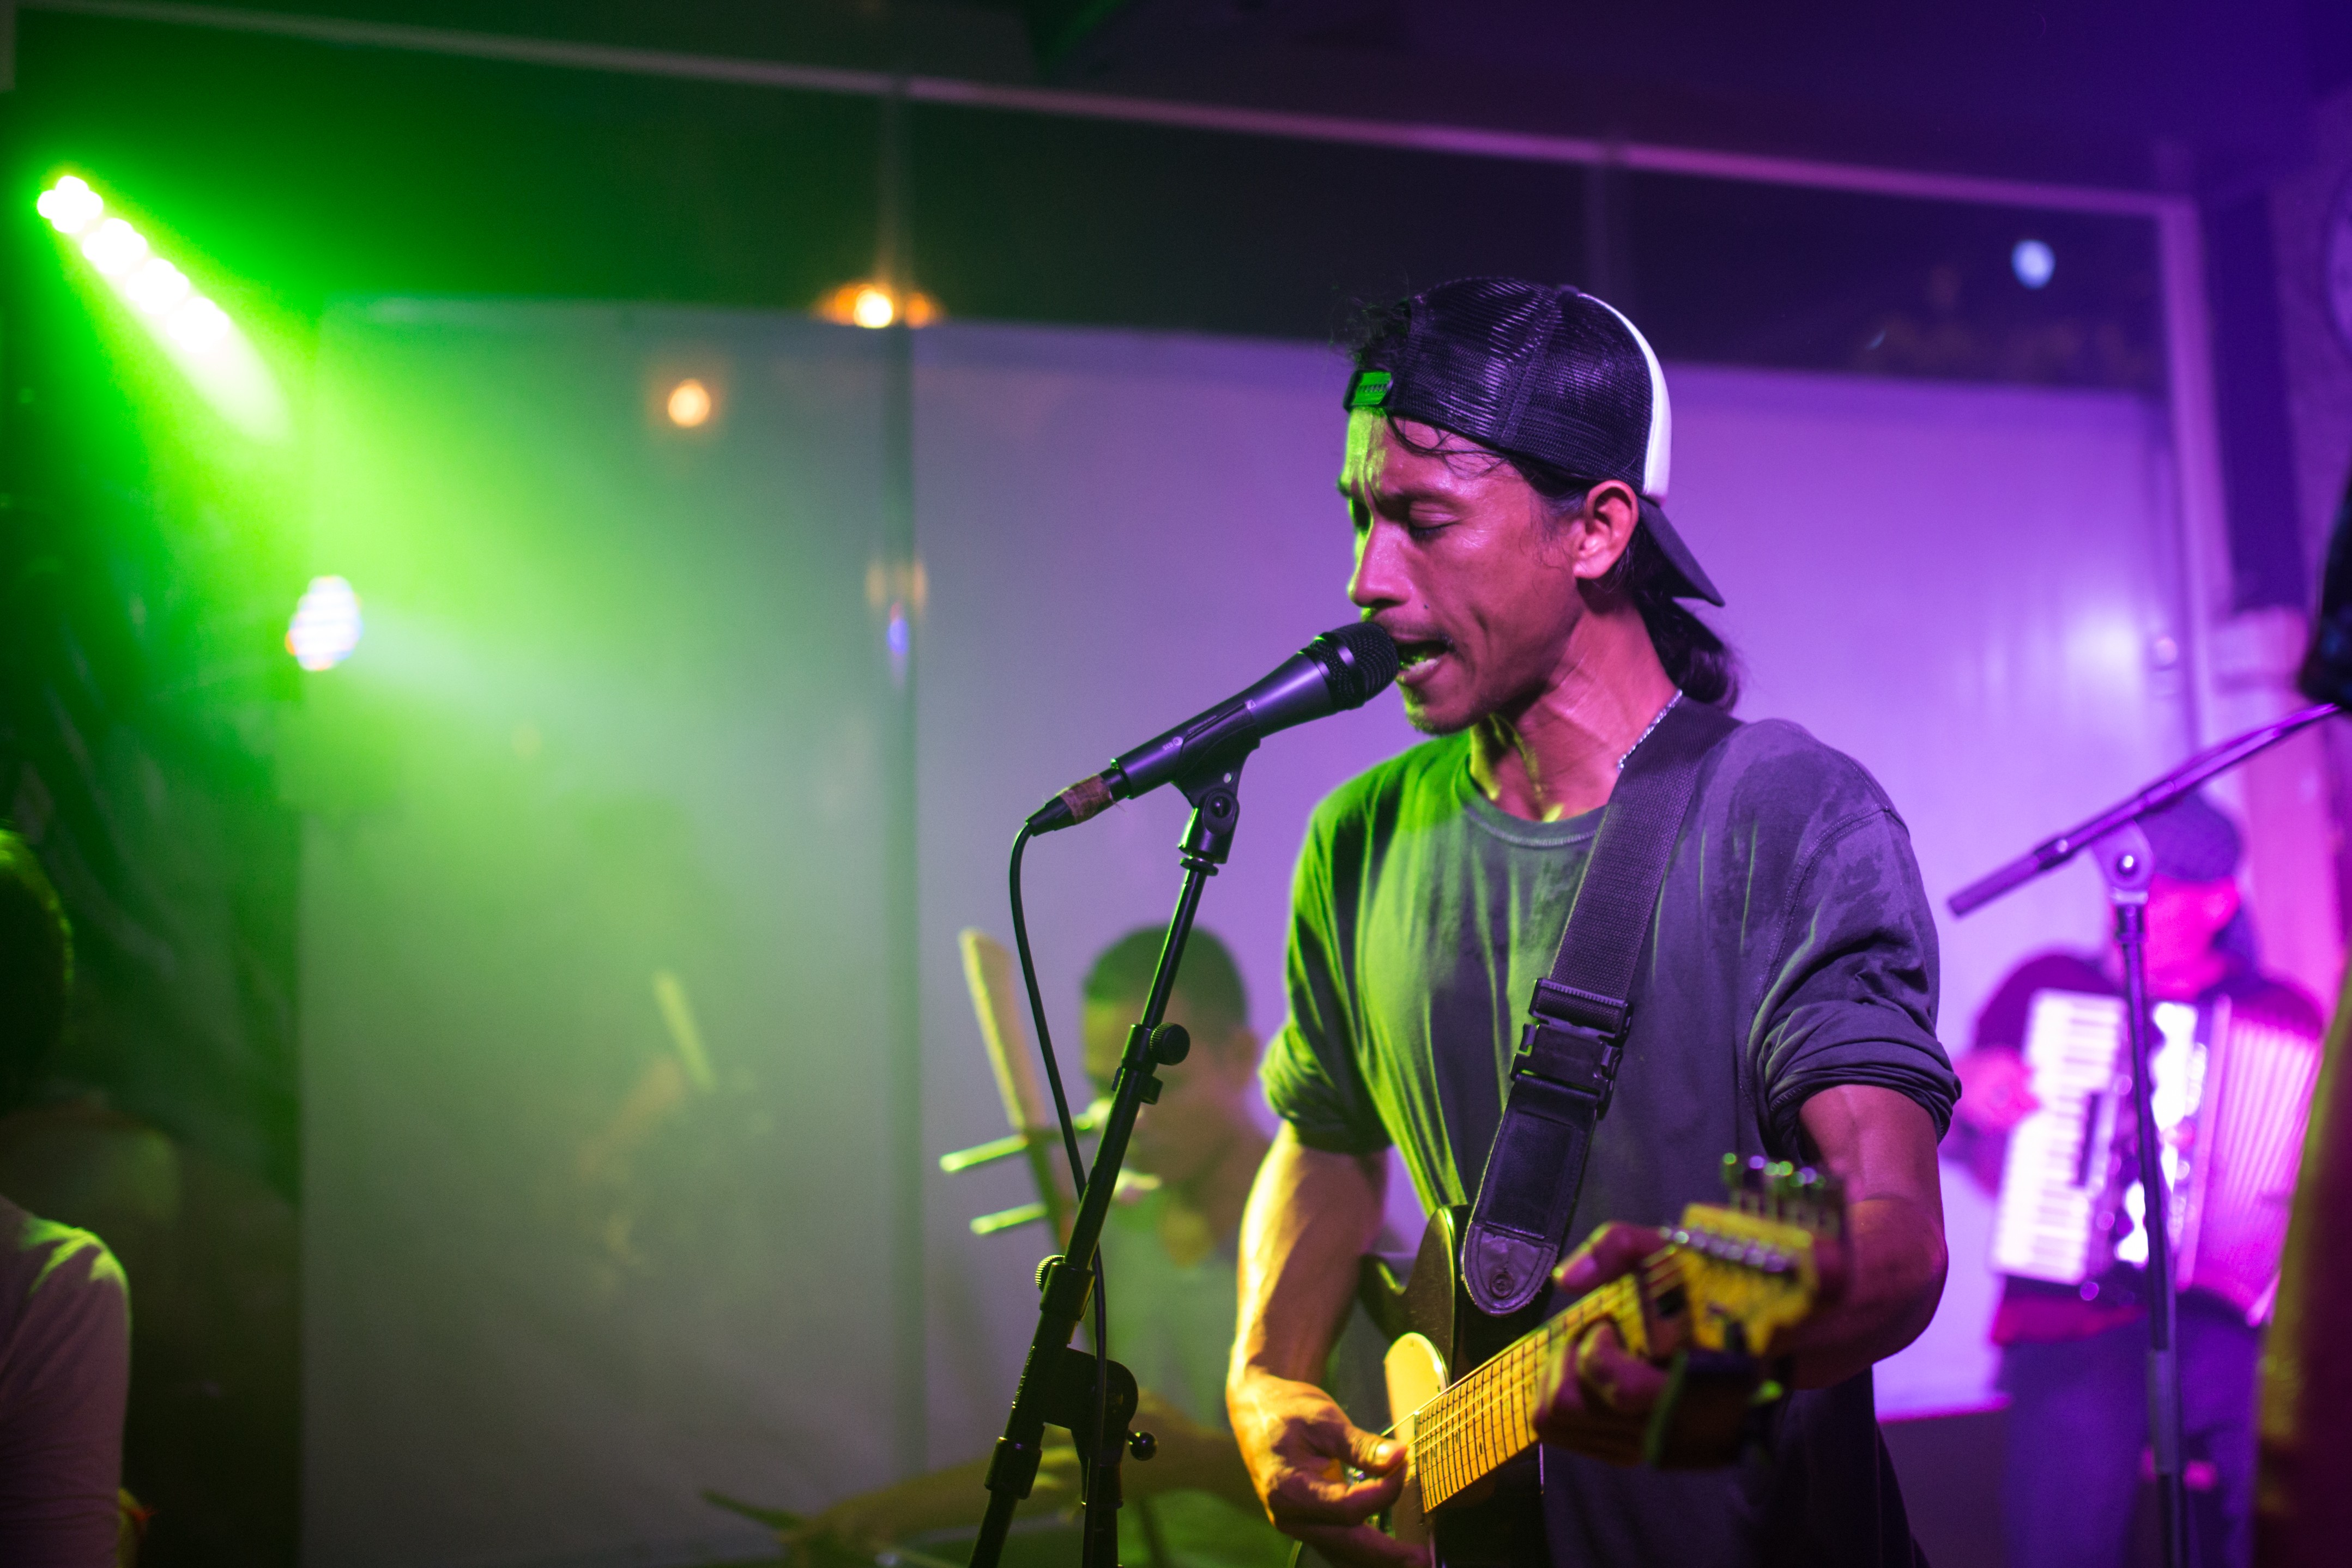 Singer and guitarist Uk Sochiet of Kampot Playboys on stage in the Cambodian capital Phnom Penh. Photo: Steve Porte